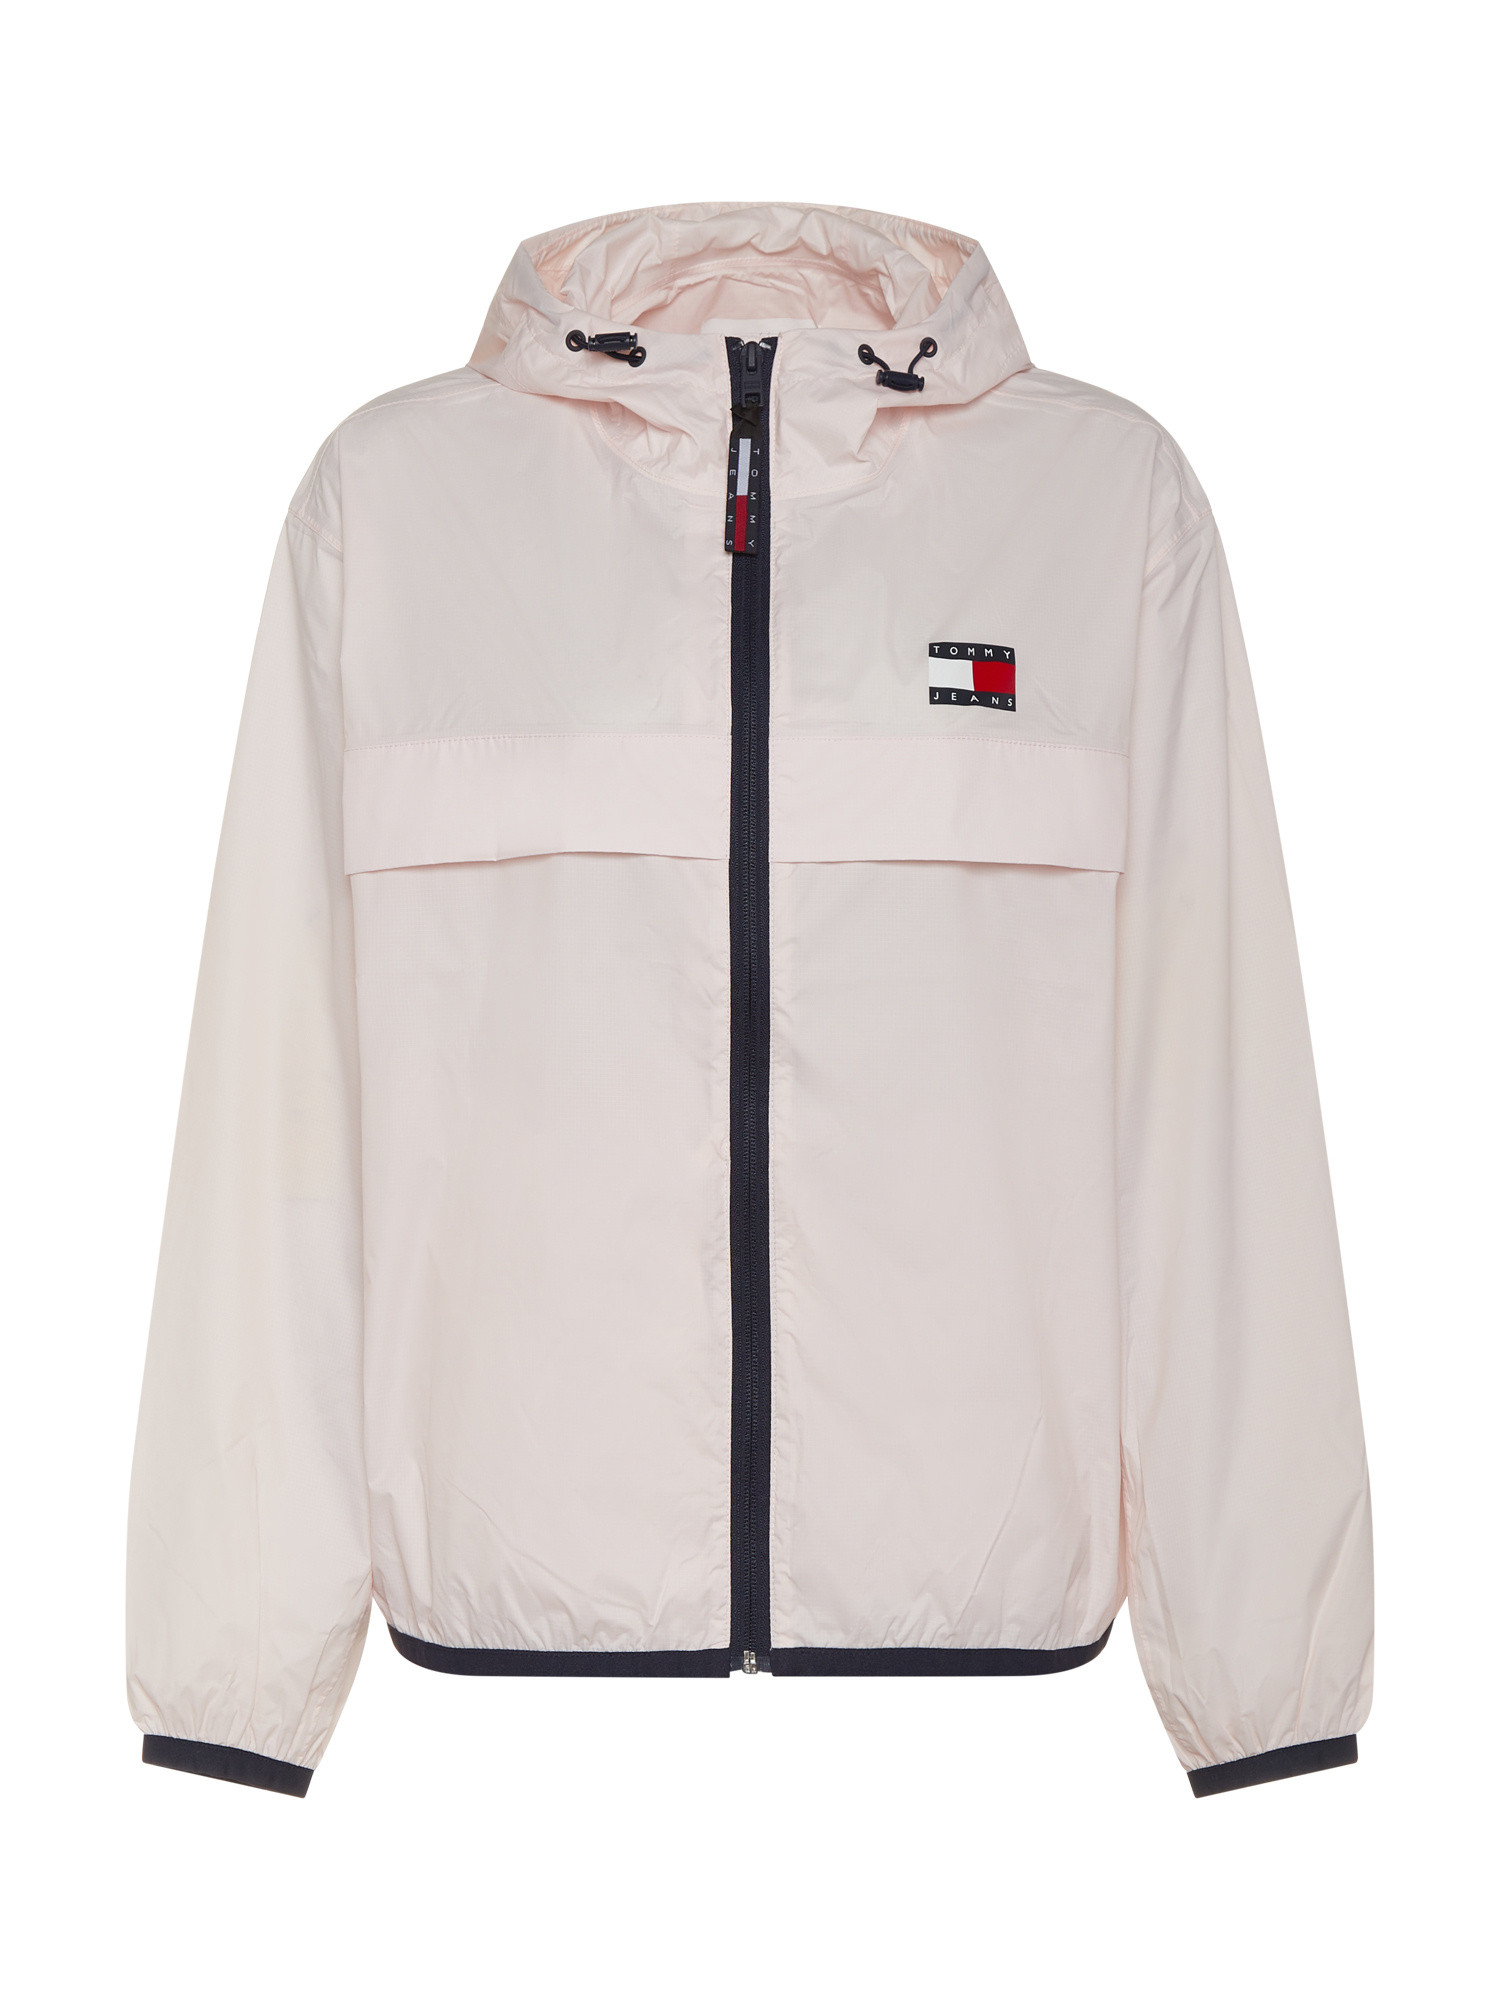 Tommy Jeans - Windbreaker with logo, Light Pink, large image number 0